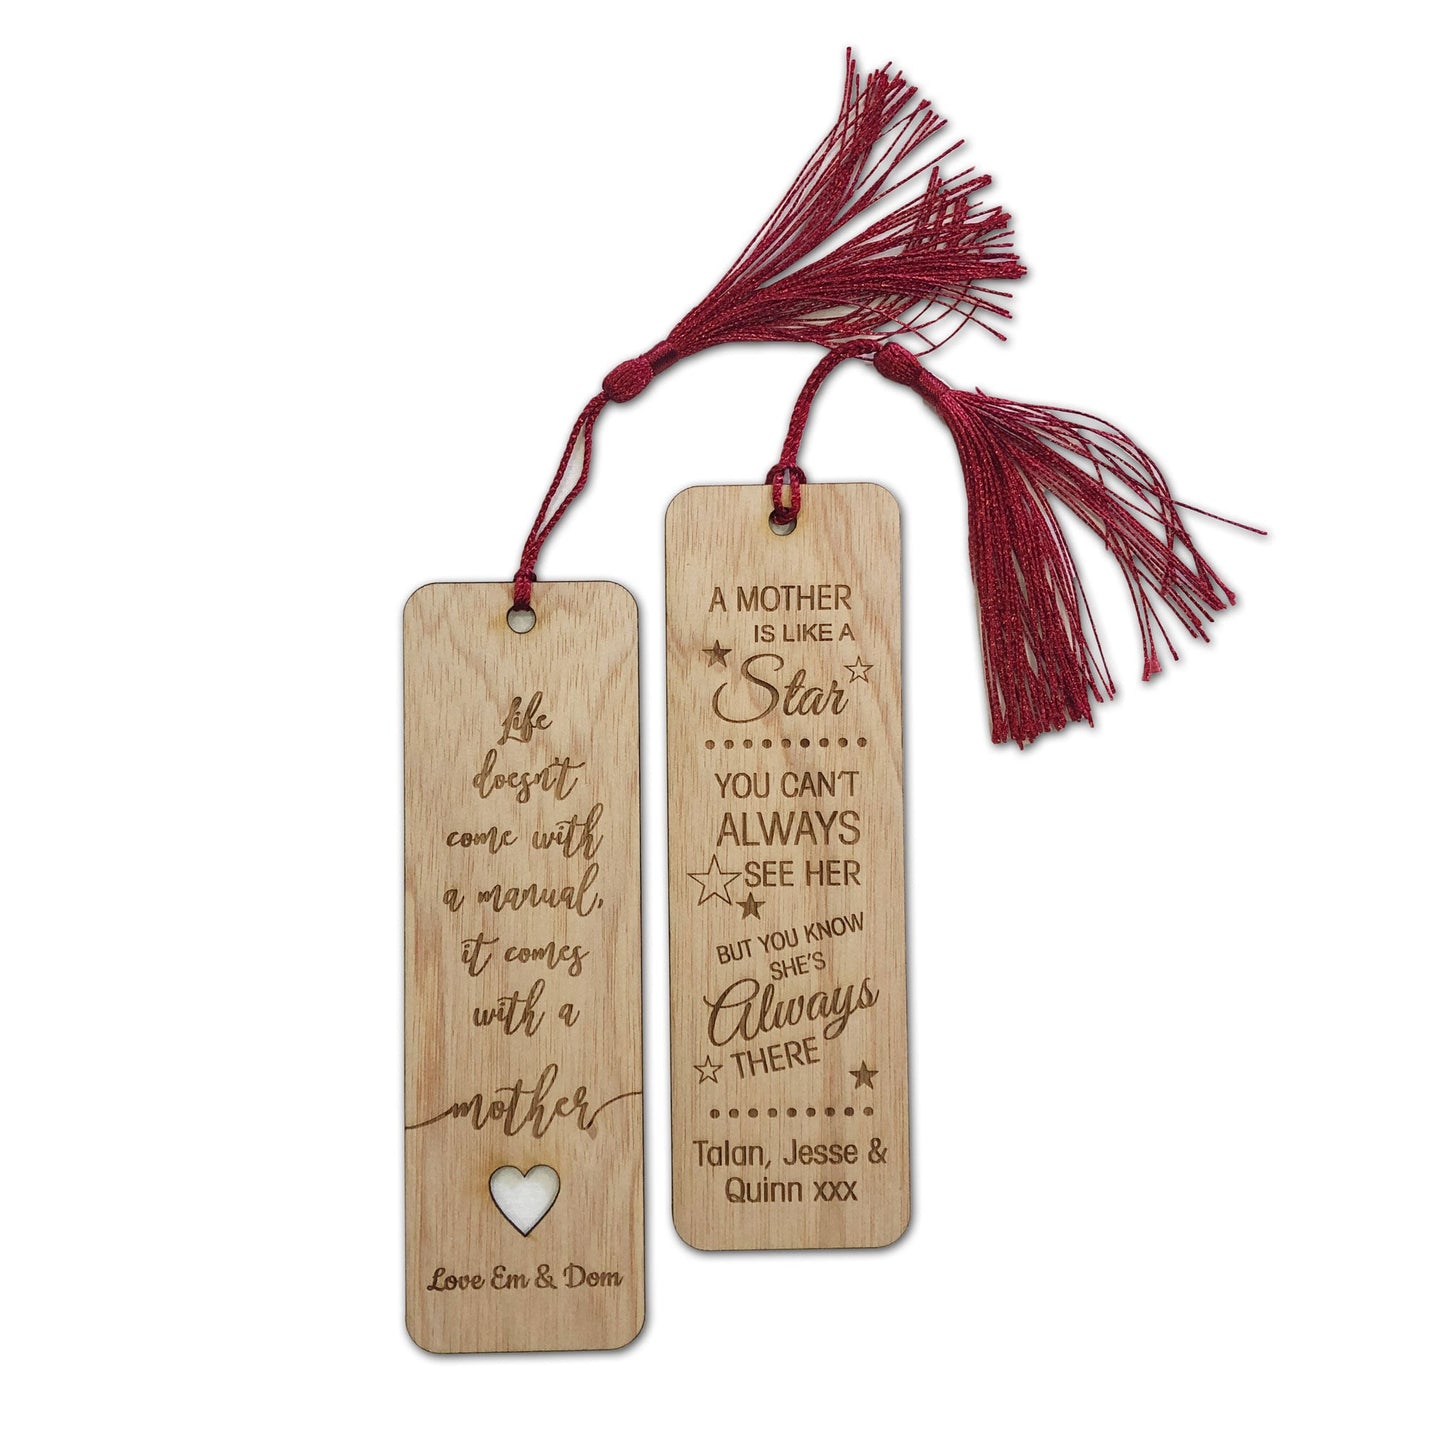 Personalised Wooden Bookmark with Tassel Engraved and message for Mothers Day Birthday Grandma mum